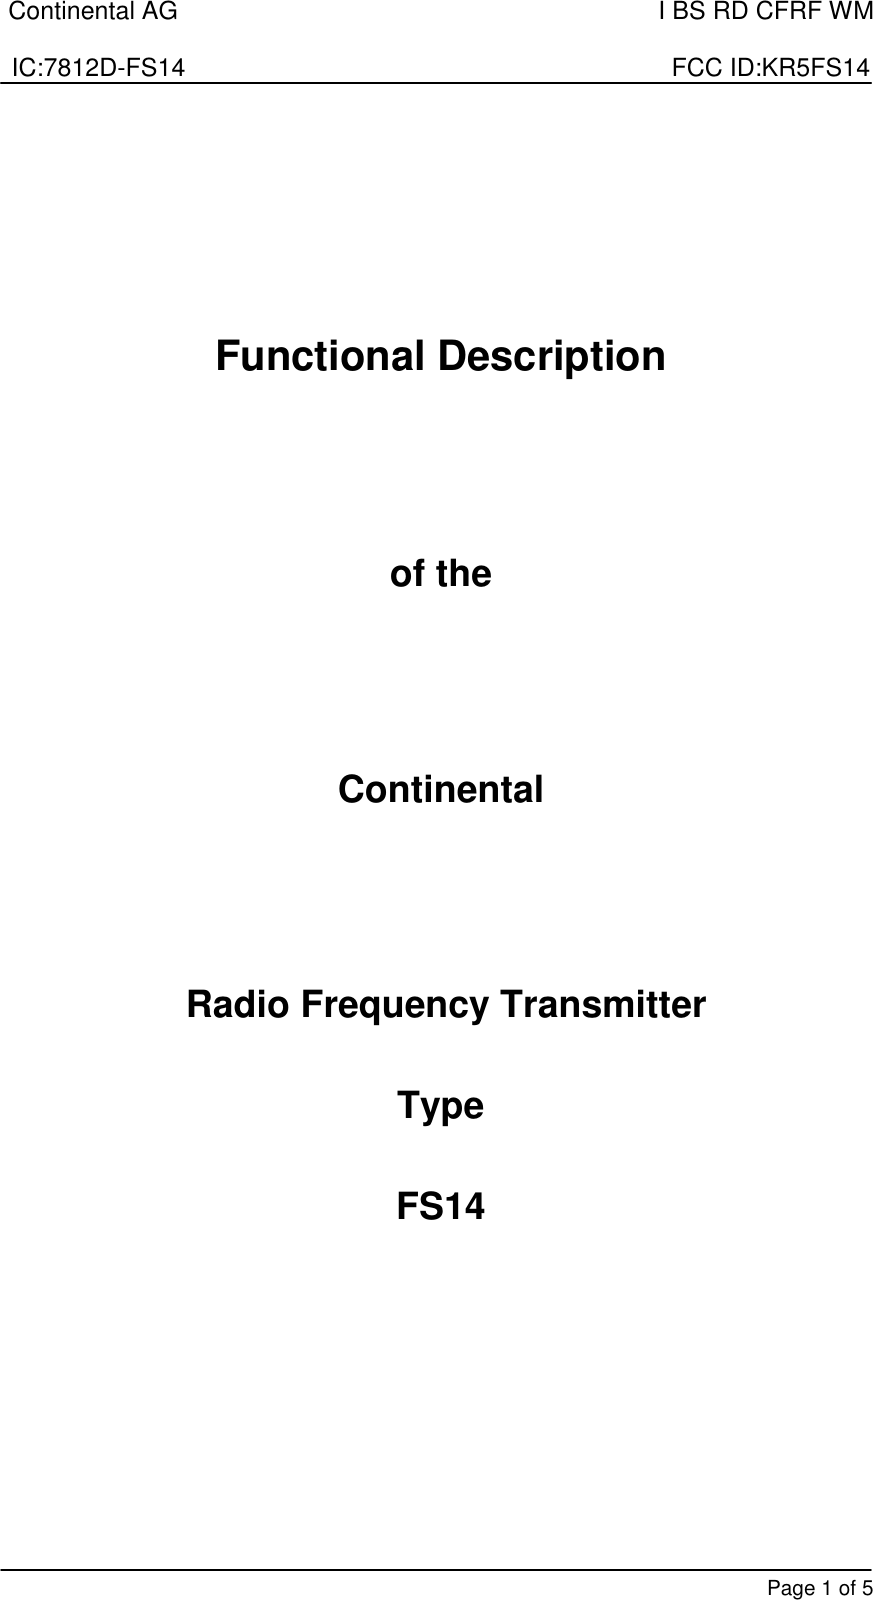 Continental AG    I BS RD CFRF WM  IC:7812D-FS14                                                                      FCC ID:KR5FS14       Page 1 of 5     Functional Description    of the     Continental     Radio Frequency Transmitter   Type   FS14      